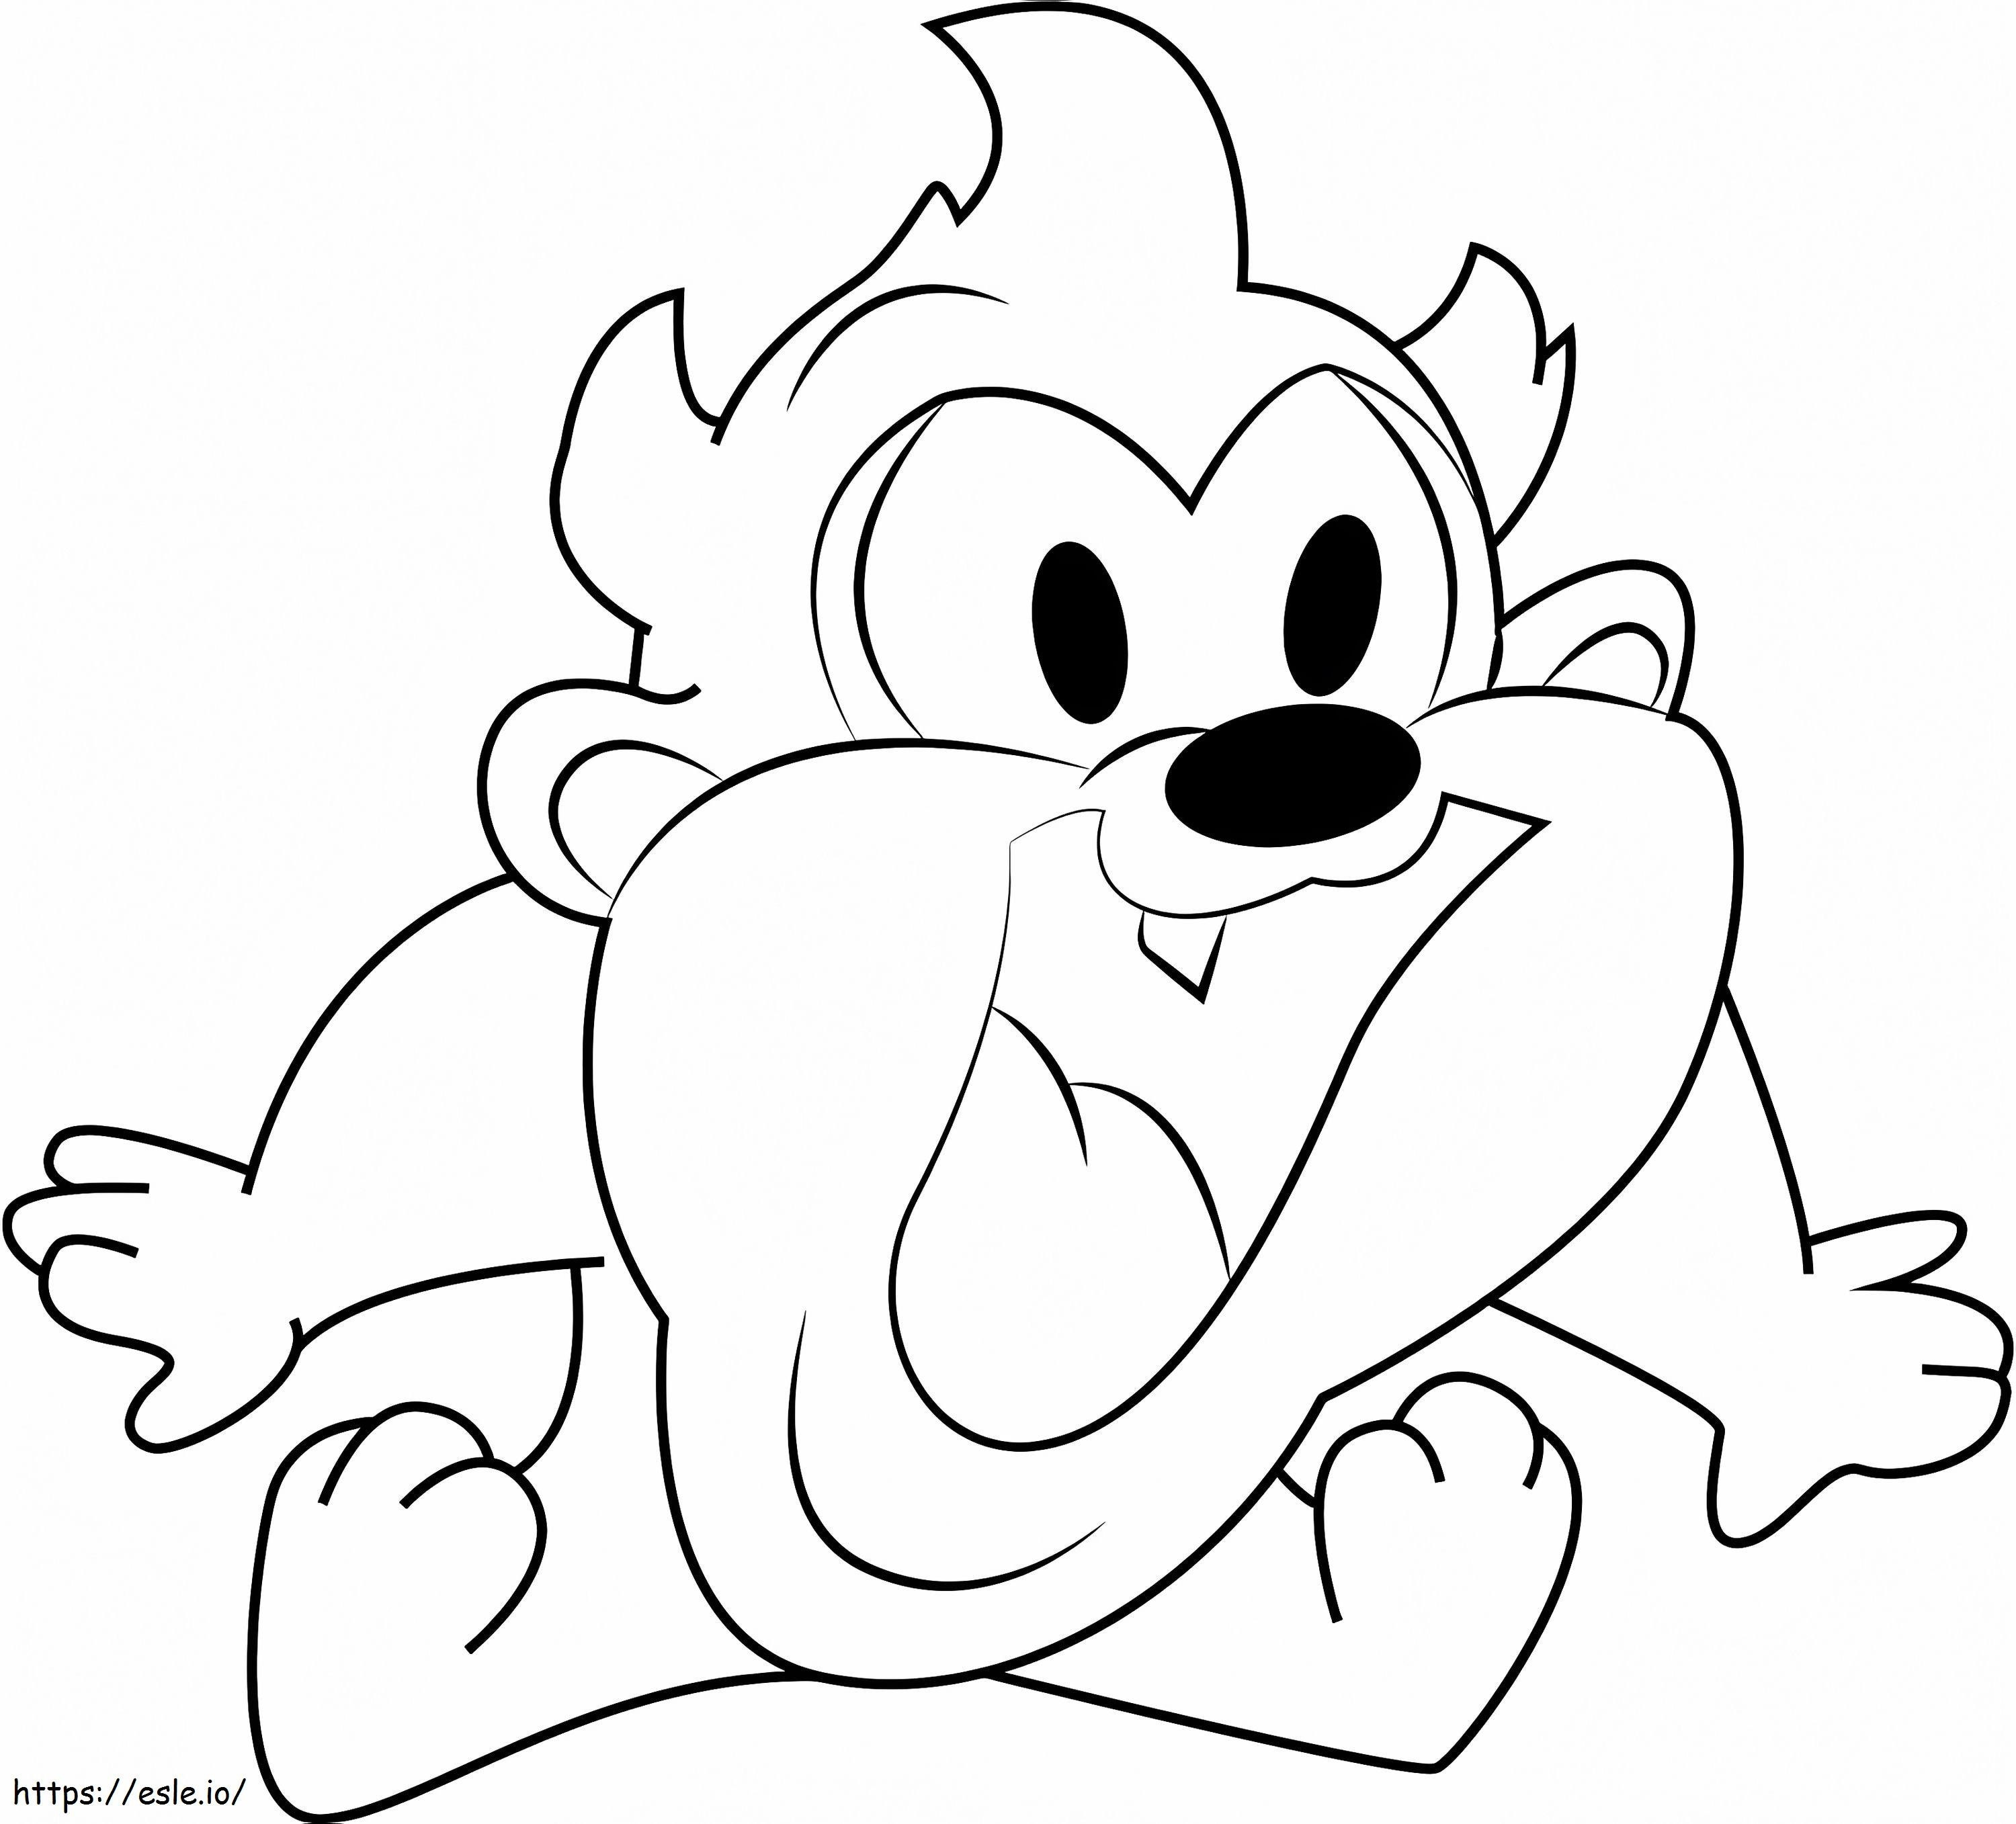 1531448862 Happy Baby Taz A4 coloring page